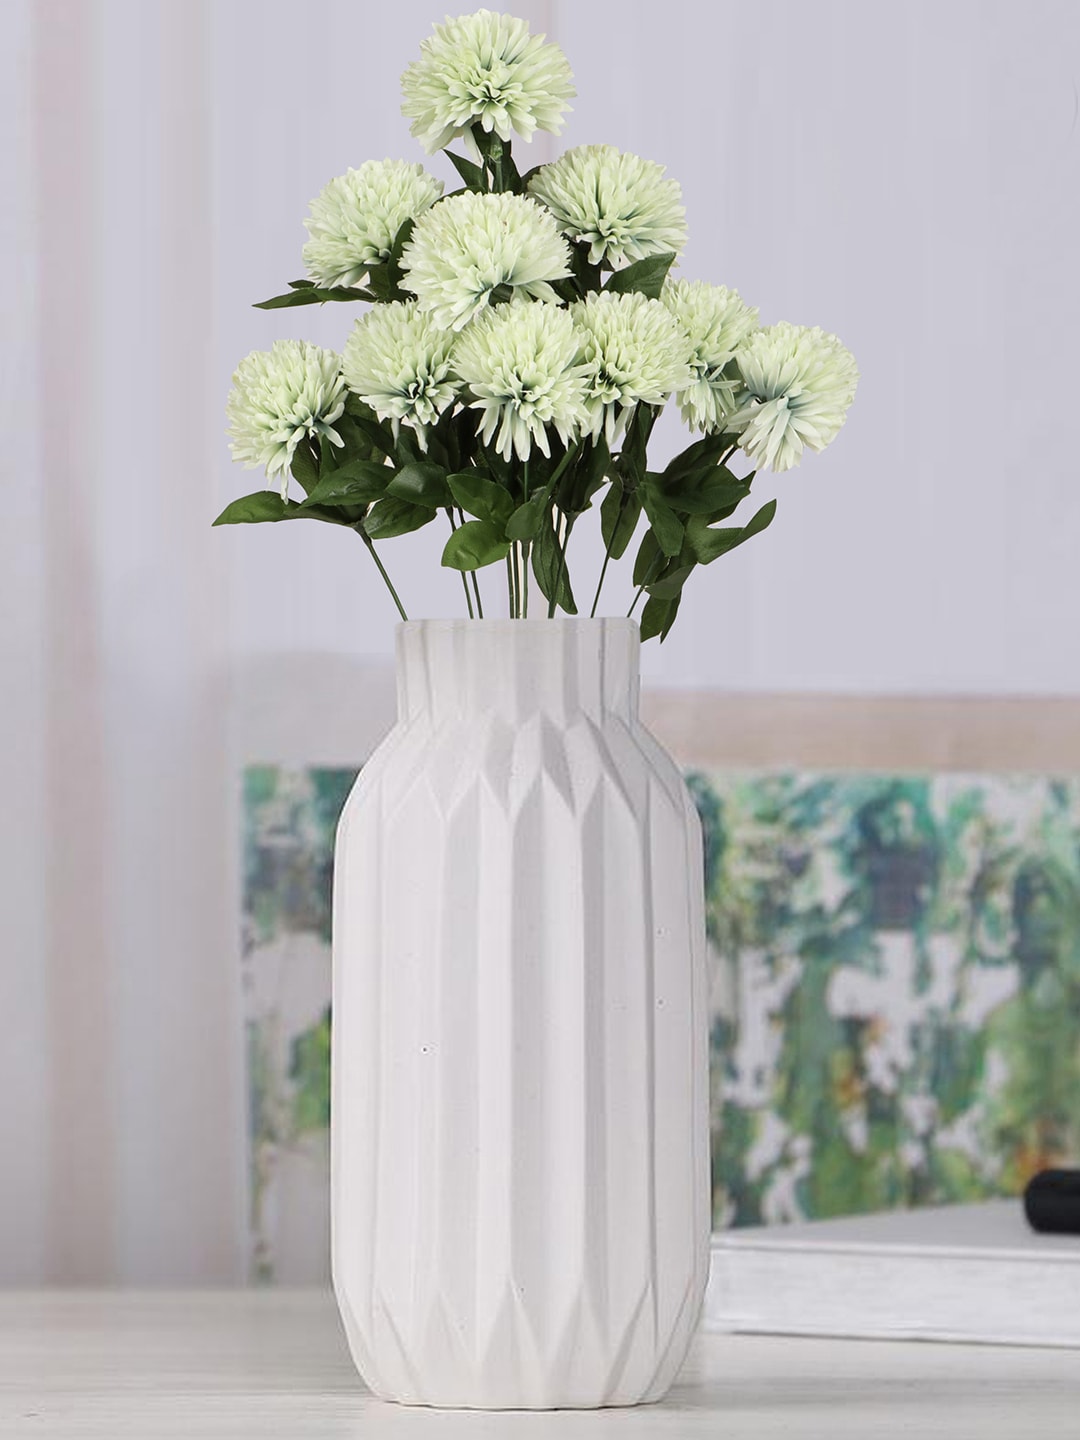 TIED RIBBONS White & Green Chrysanthemum Artificial Flower Stick Price in India